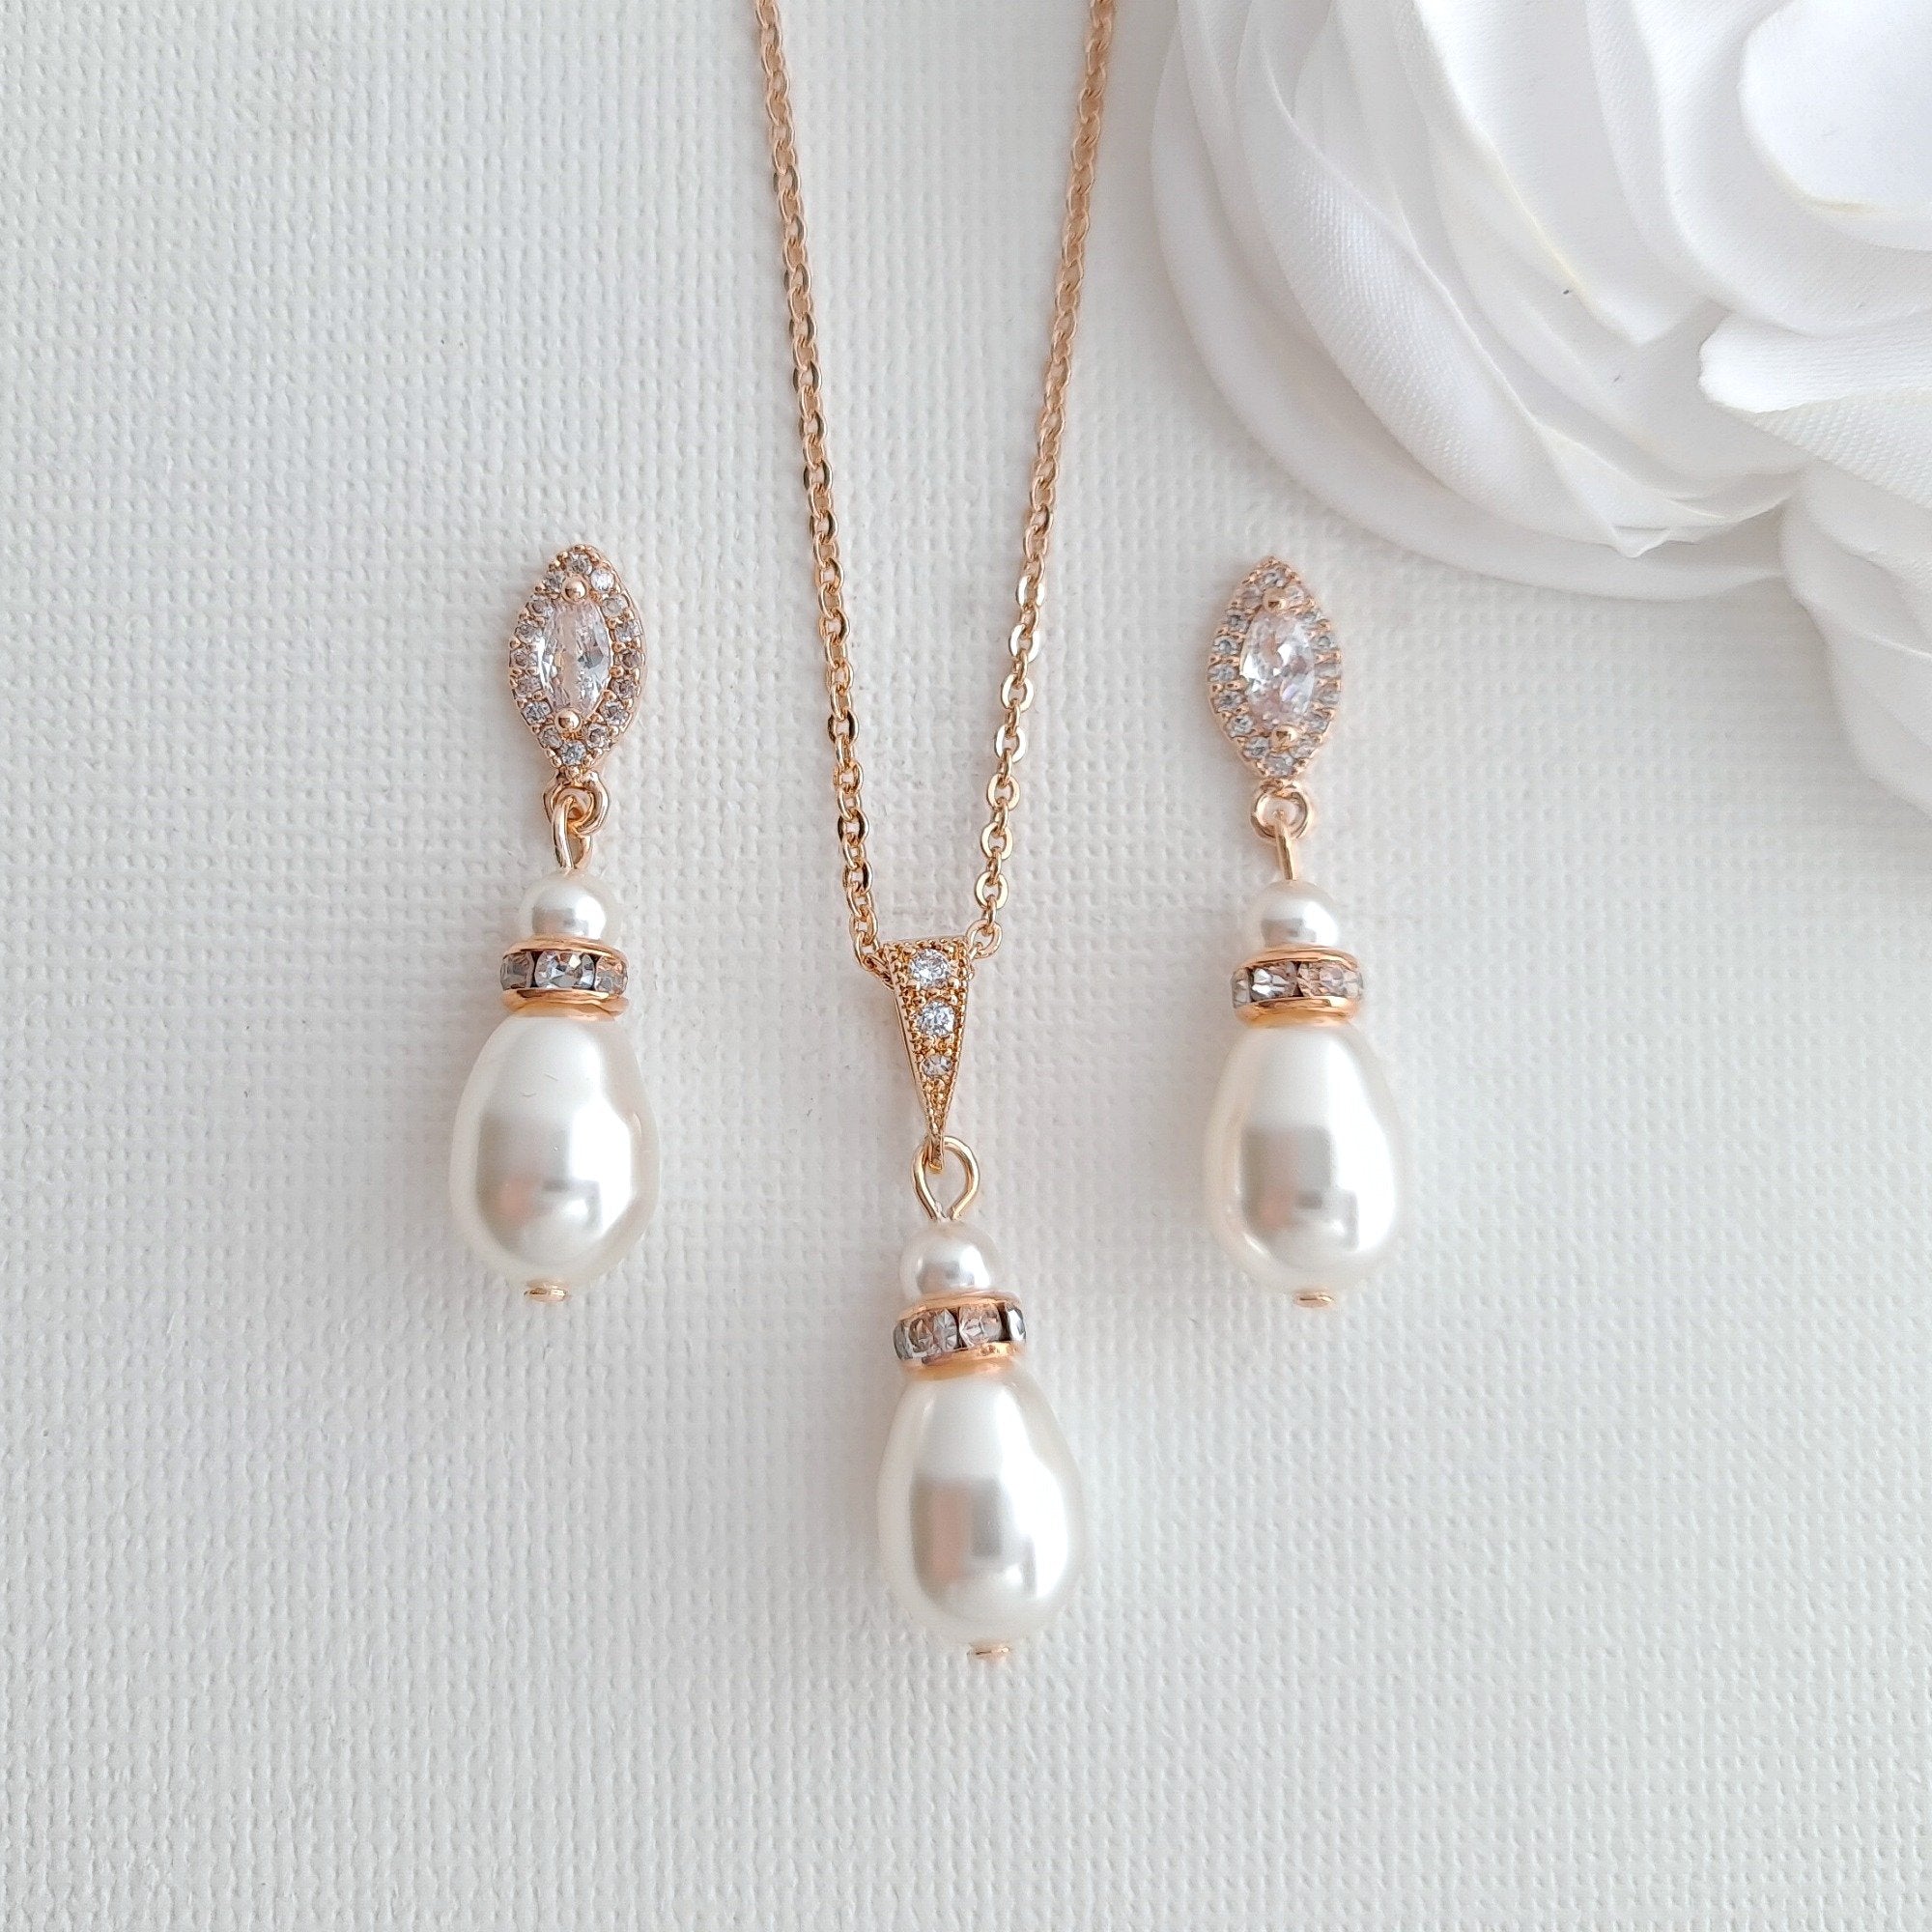 Affordable Pearl Bridesmaid Jewelry Set in Silver Gold Rose Gold Tones- Ella